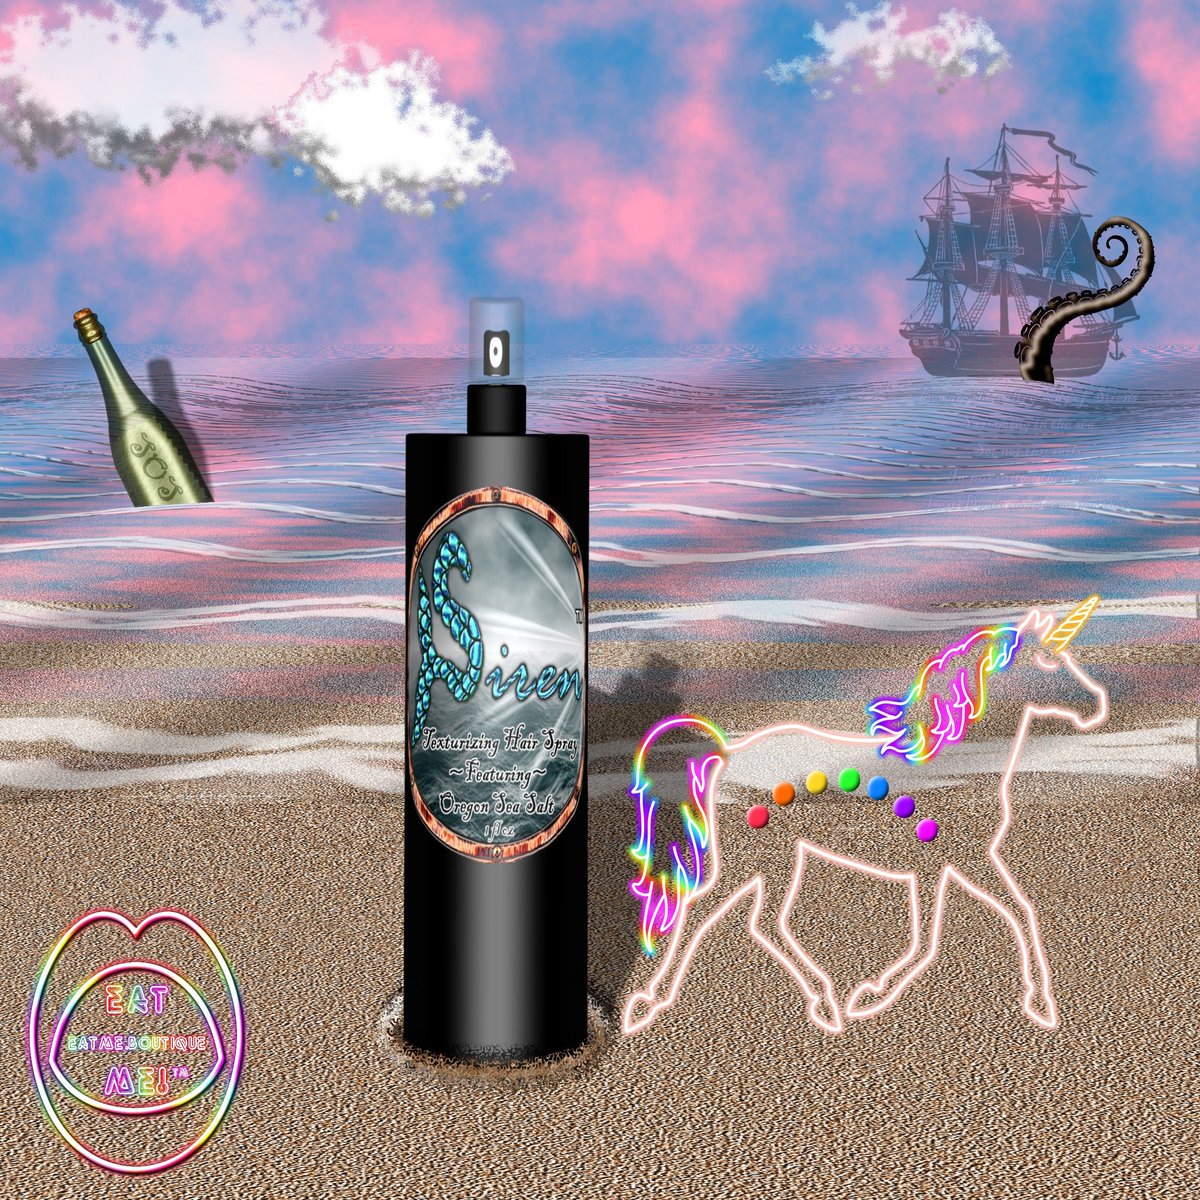 Check out the newest product in my #etsy shop: Siren™ Sea Salt Hair Spray - Unicorn Candy Drops #seasalthairspray #eatmeboutique #beauty #hair #foodie #shopsmall #mermaid #curlyhair #wavyhair #beautyproducts #smallbusiness #disabledbusinessowner etsy.me/3I04vqH